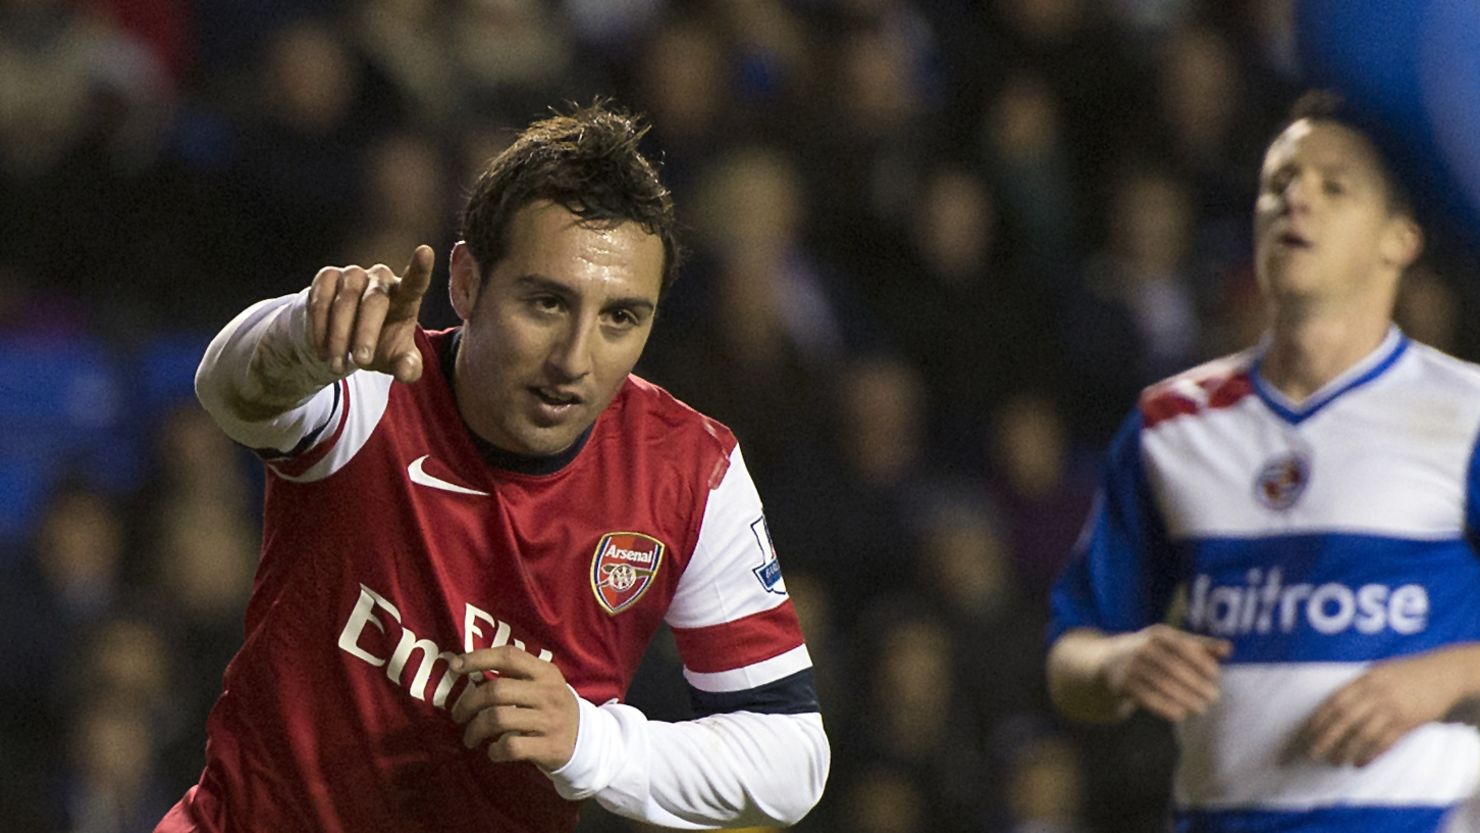 Spanish midfielder Santi Cazorla grabbed his first hat-trick in English football as Arsenal beat Reading 5-2